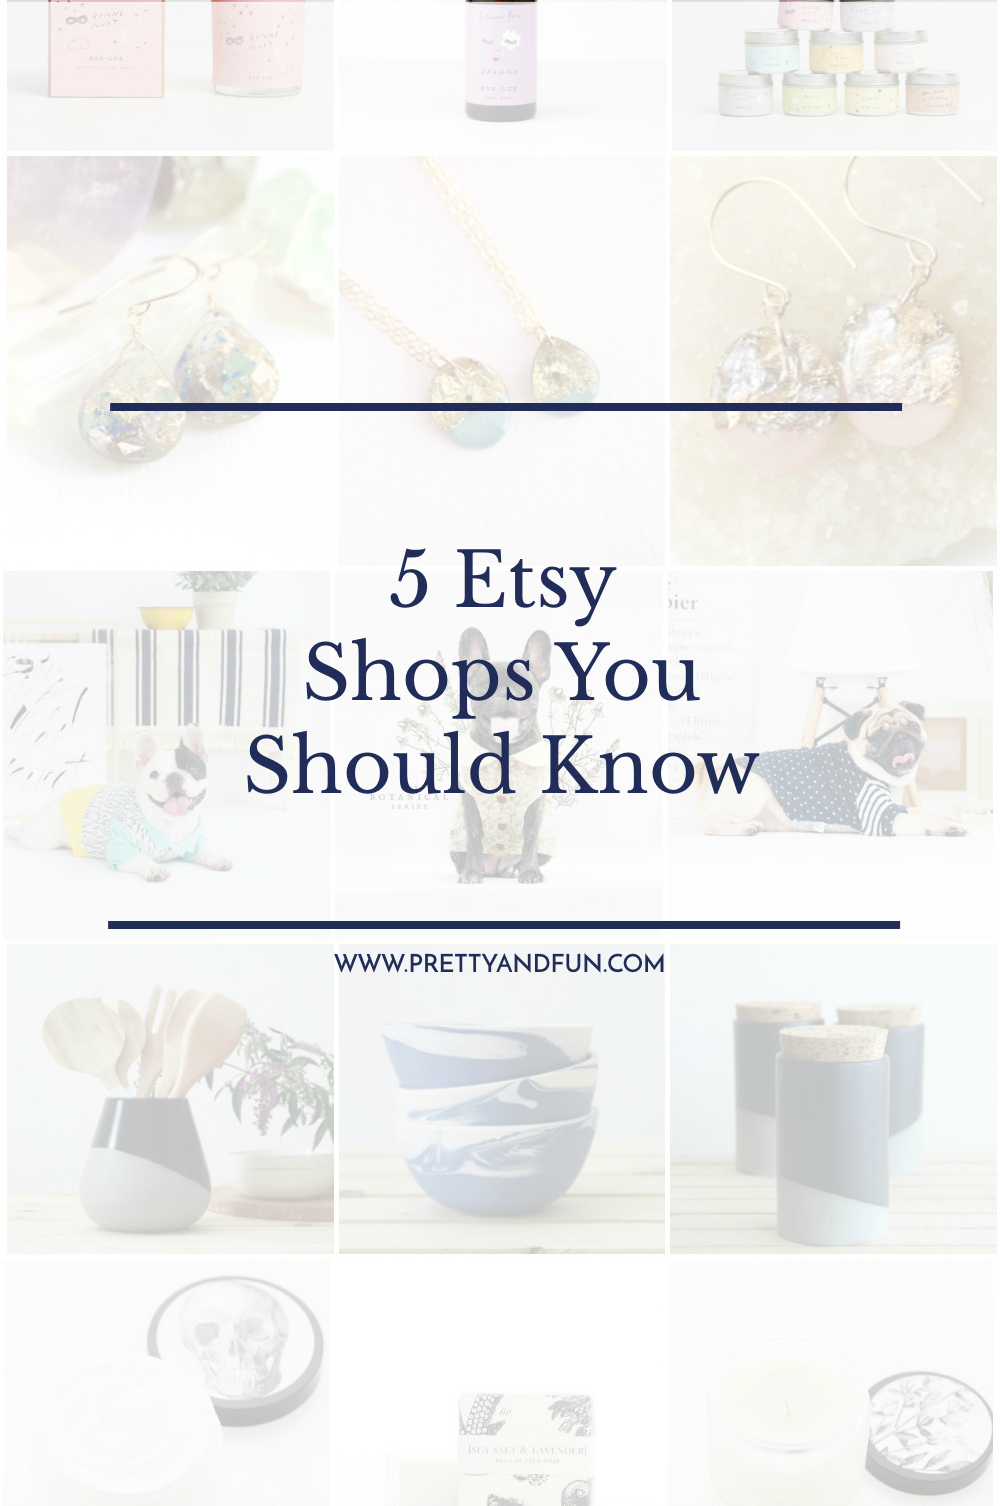 5 Etsy Shops You Should Know.